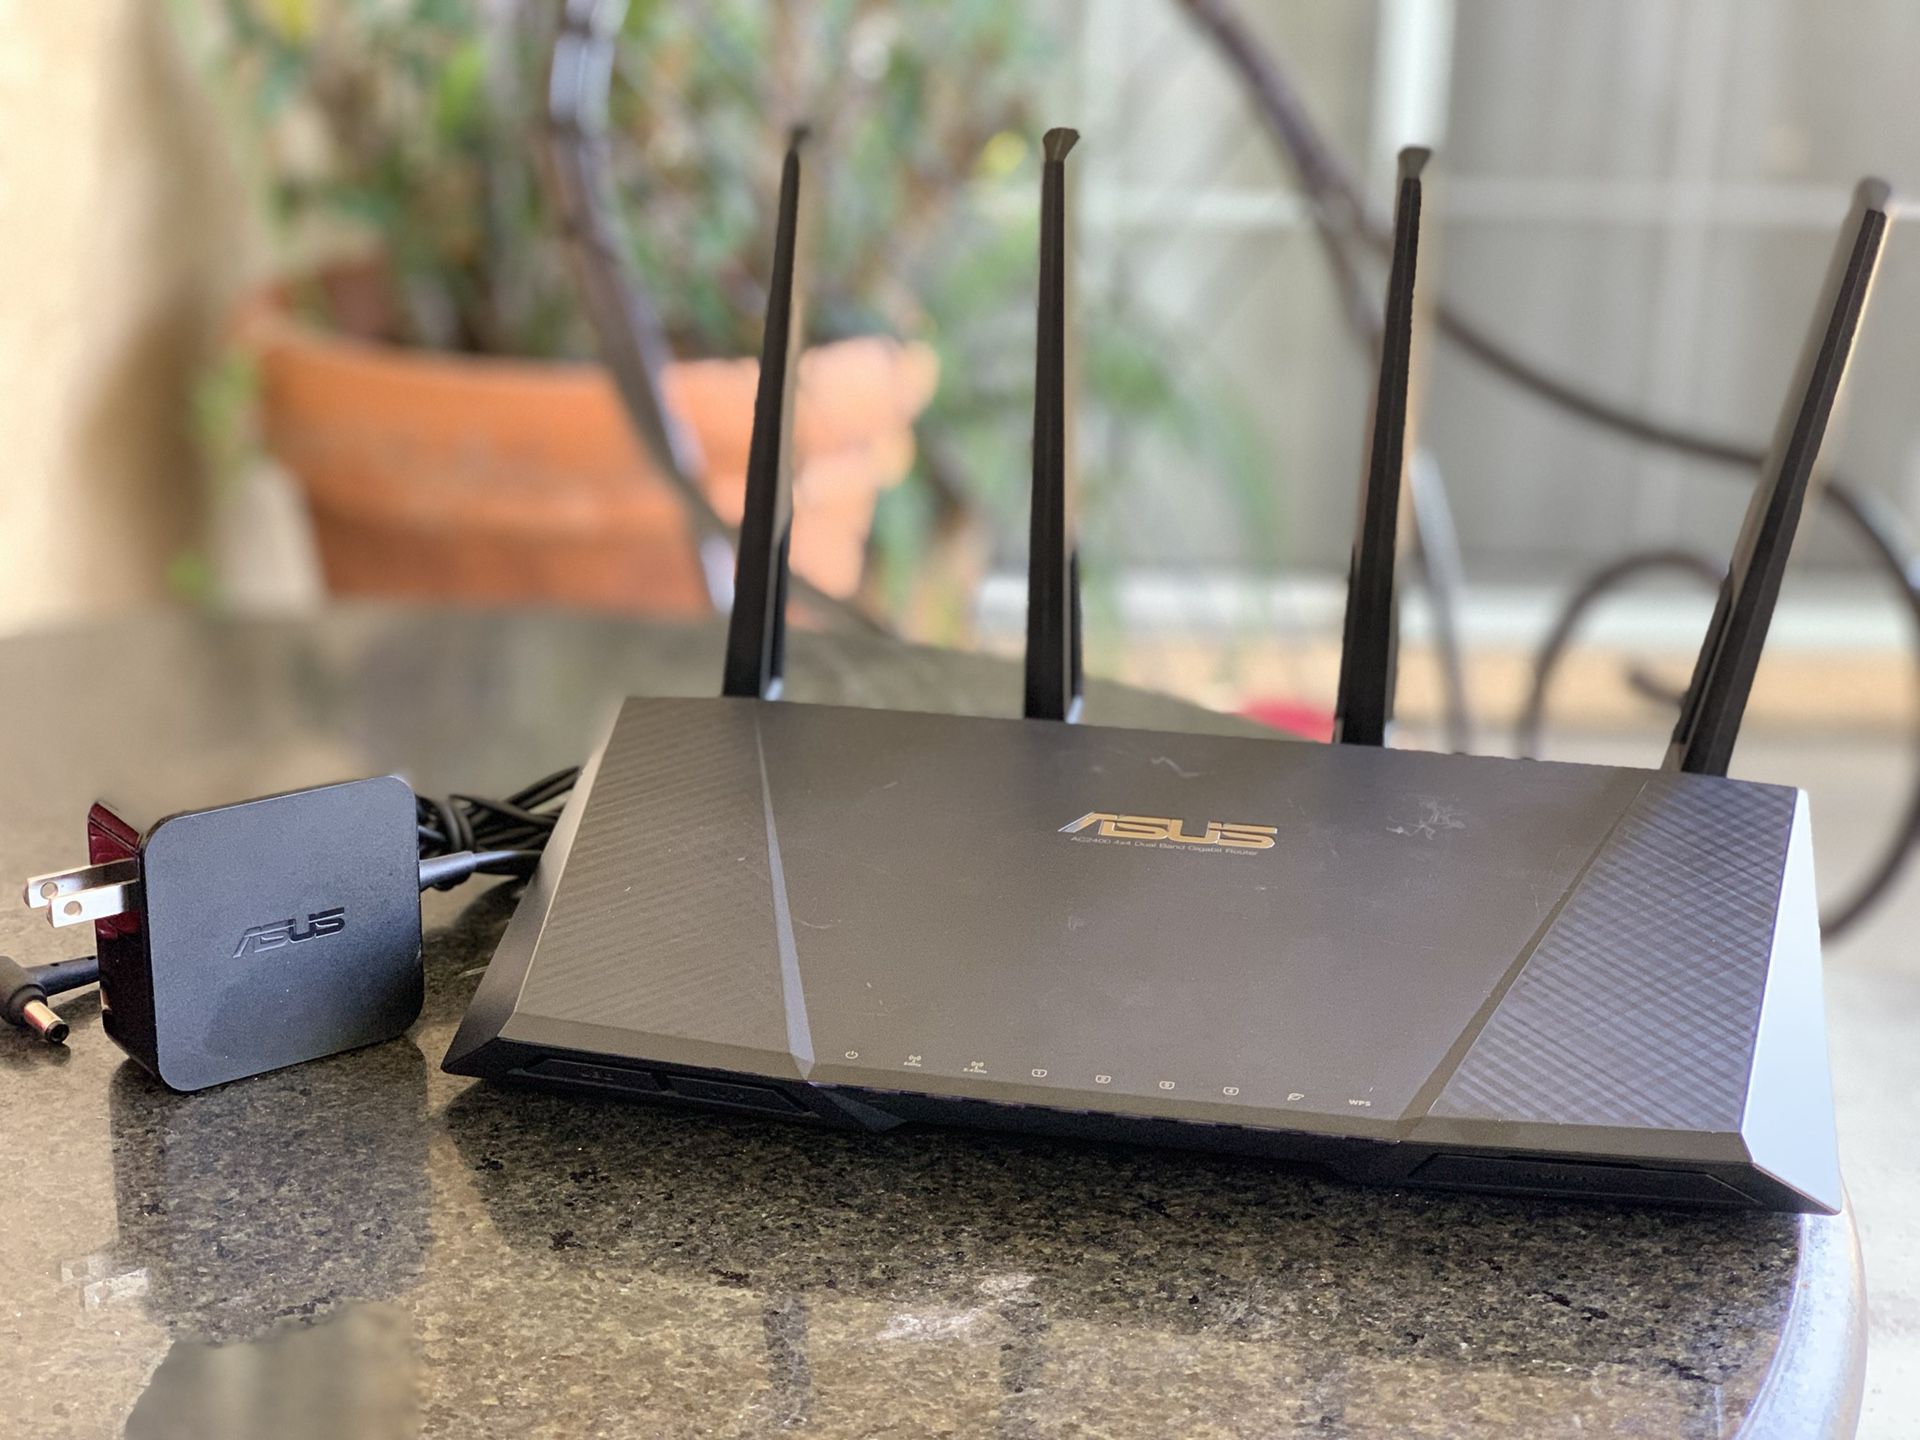 ASUS WiFi router. 2G and 5G